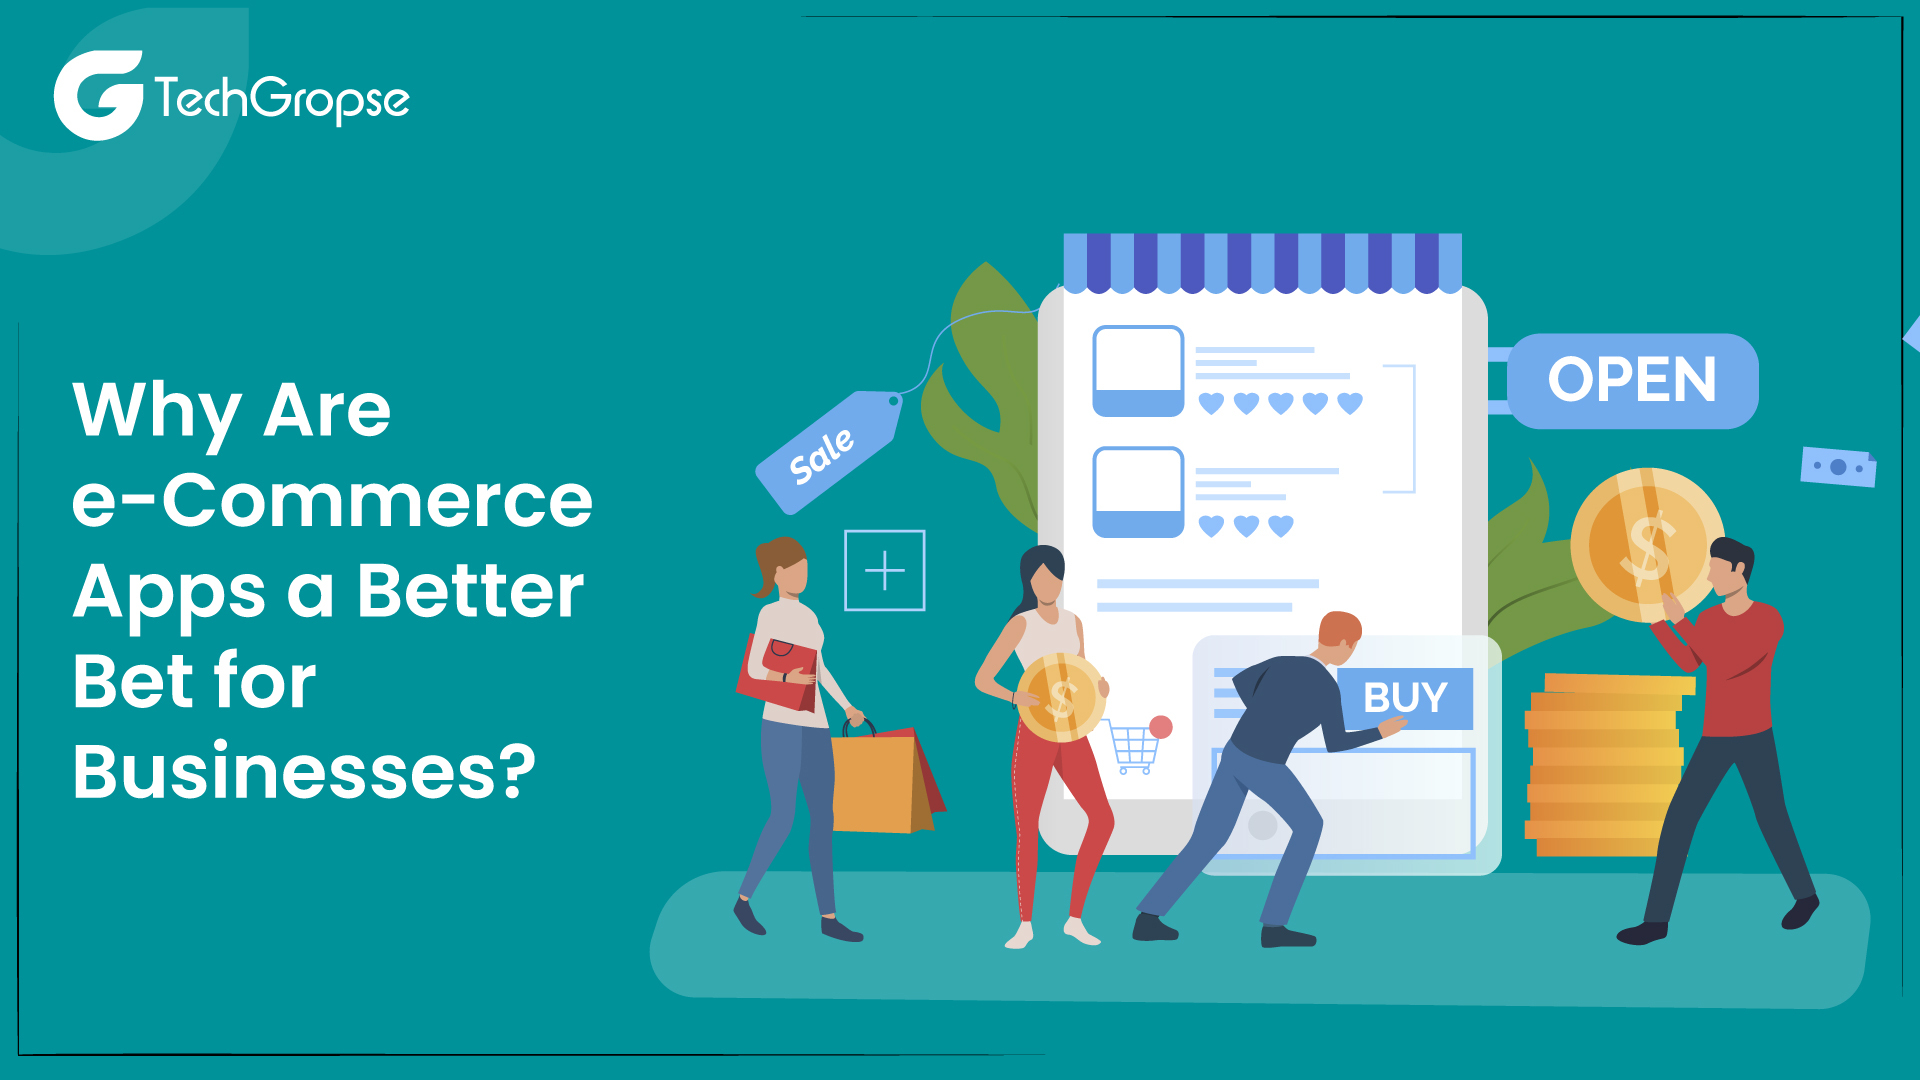 Why Are e-Commerce Apps a Better Bet for Businesses?